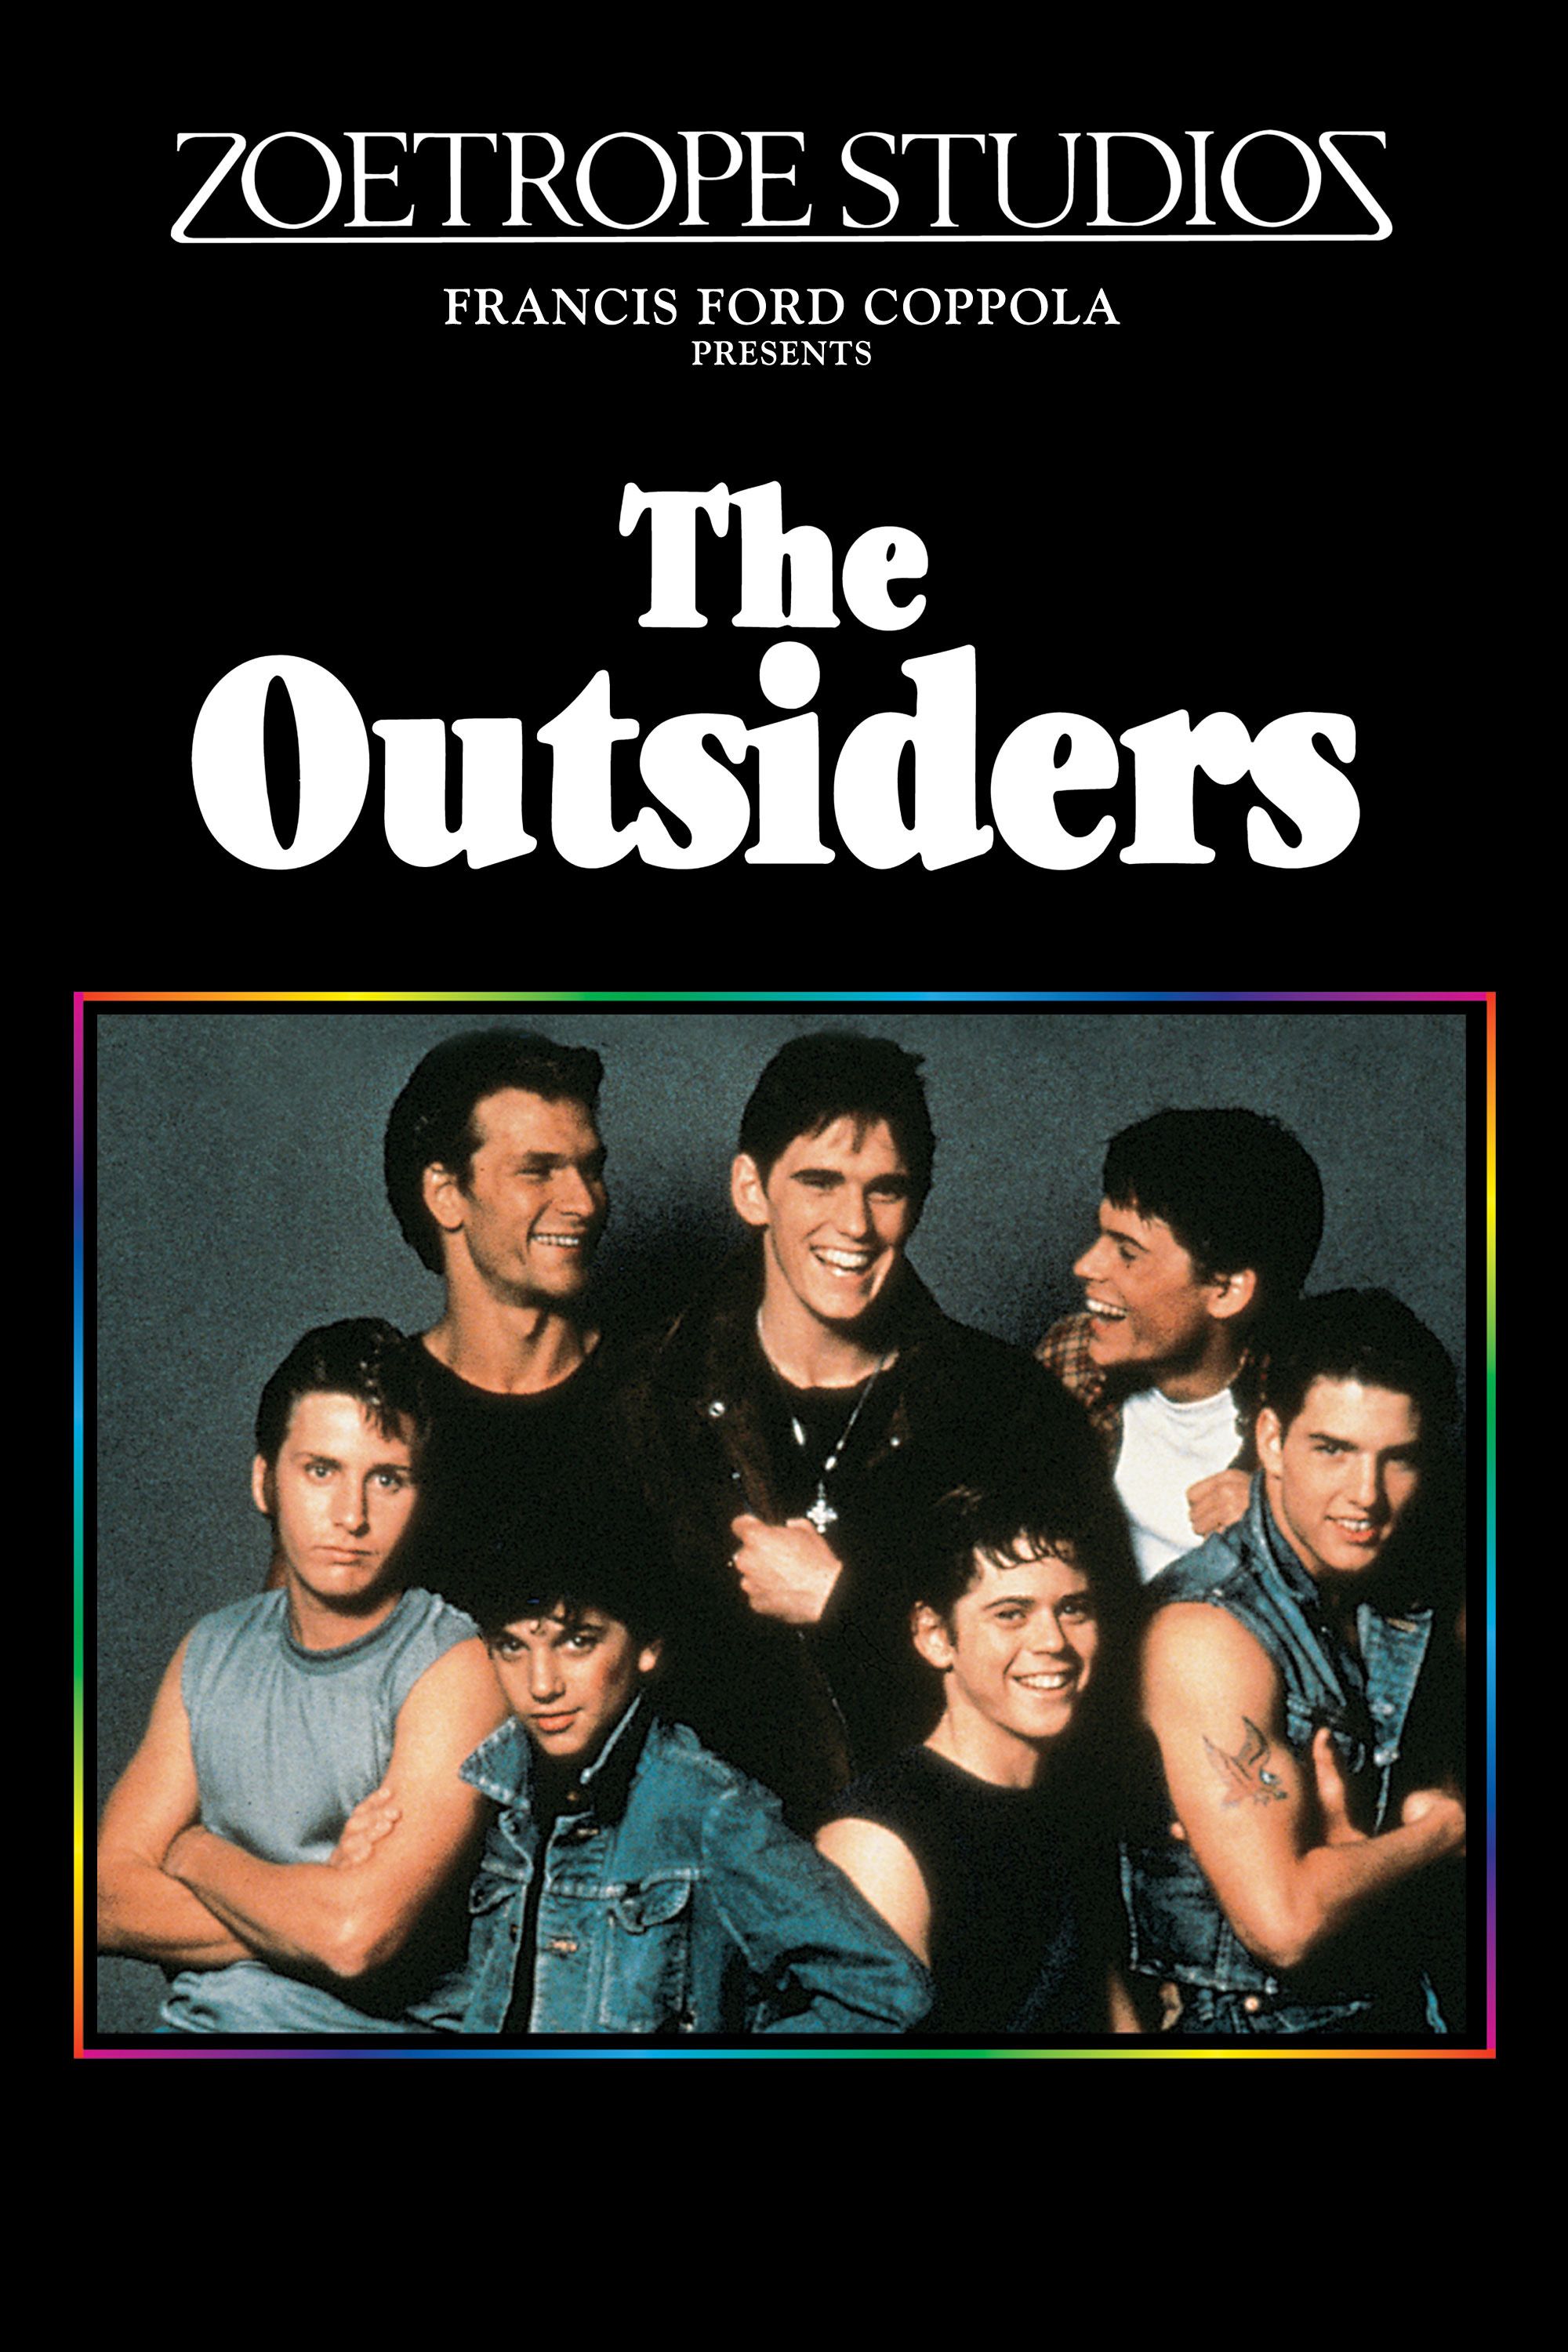 The outsiders book free download - sellinglasopa